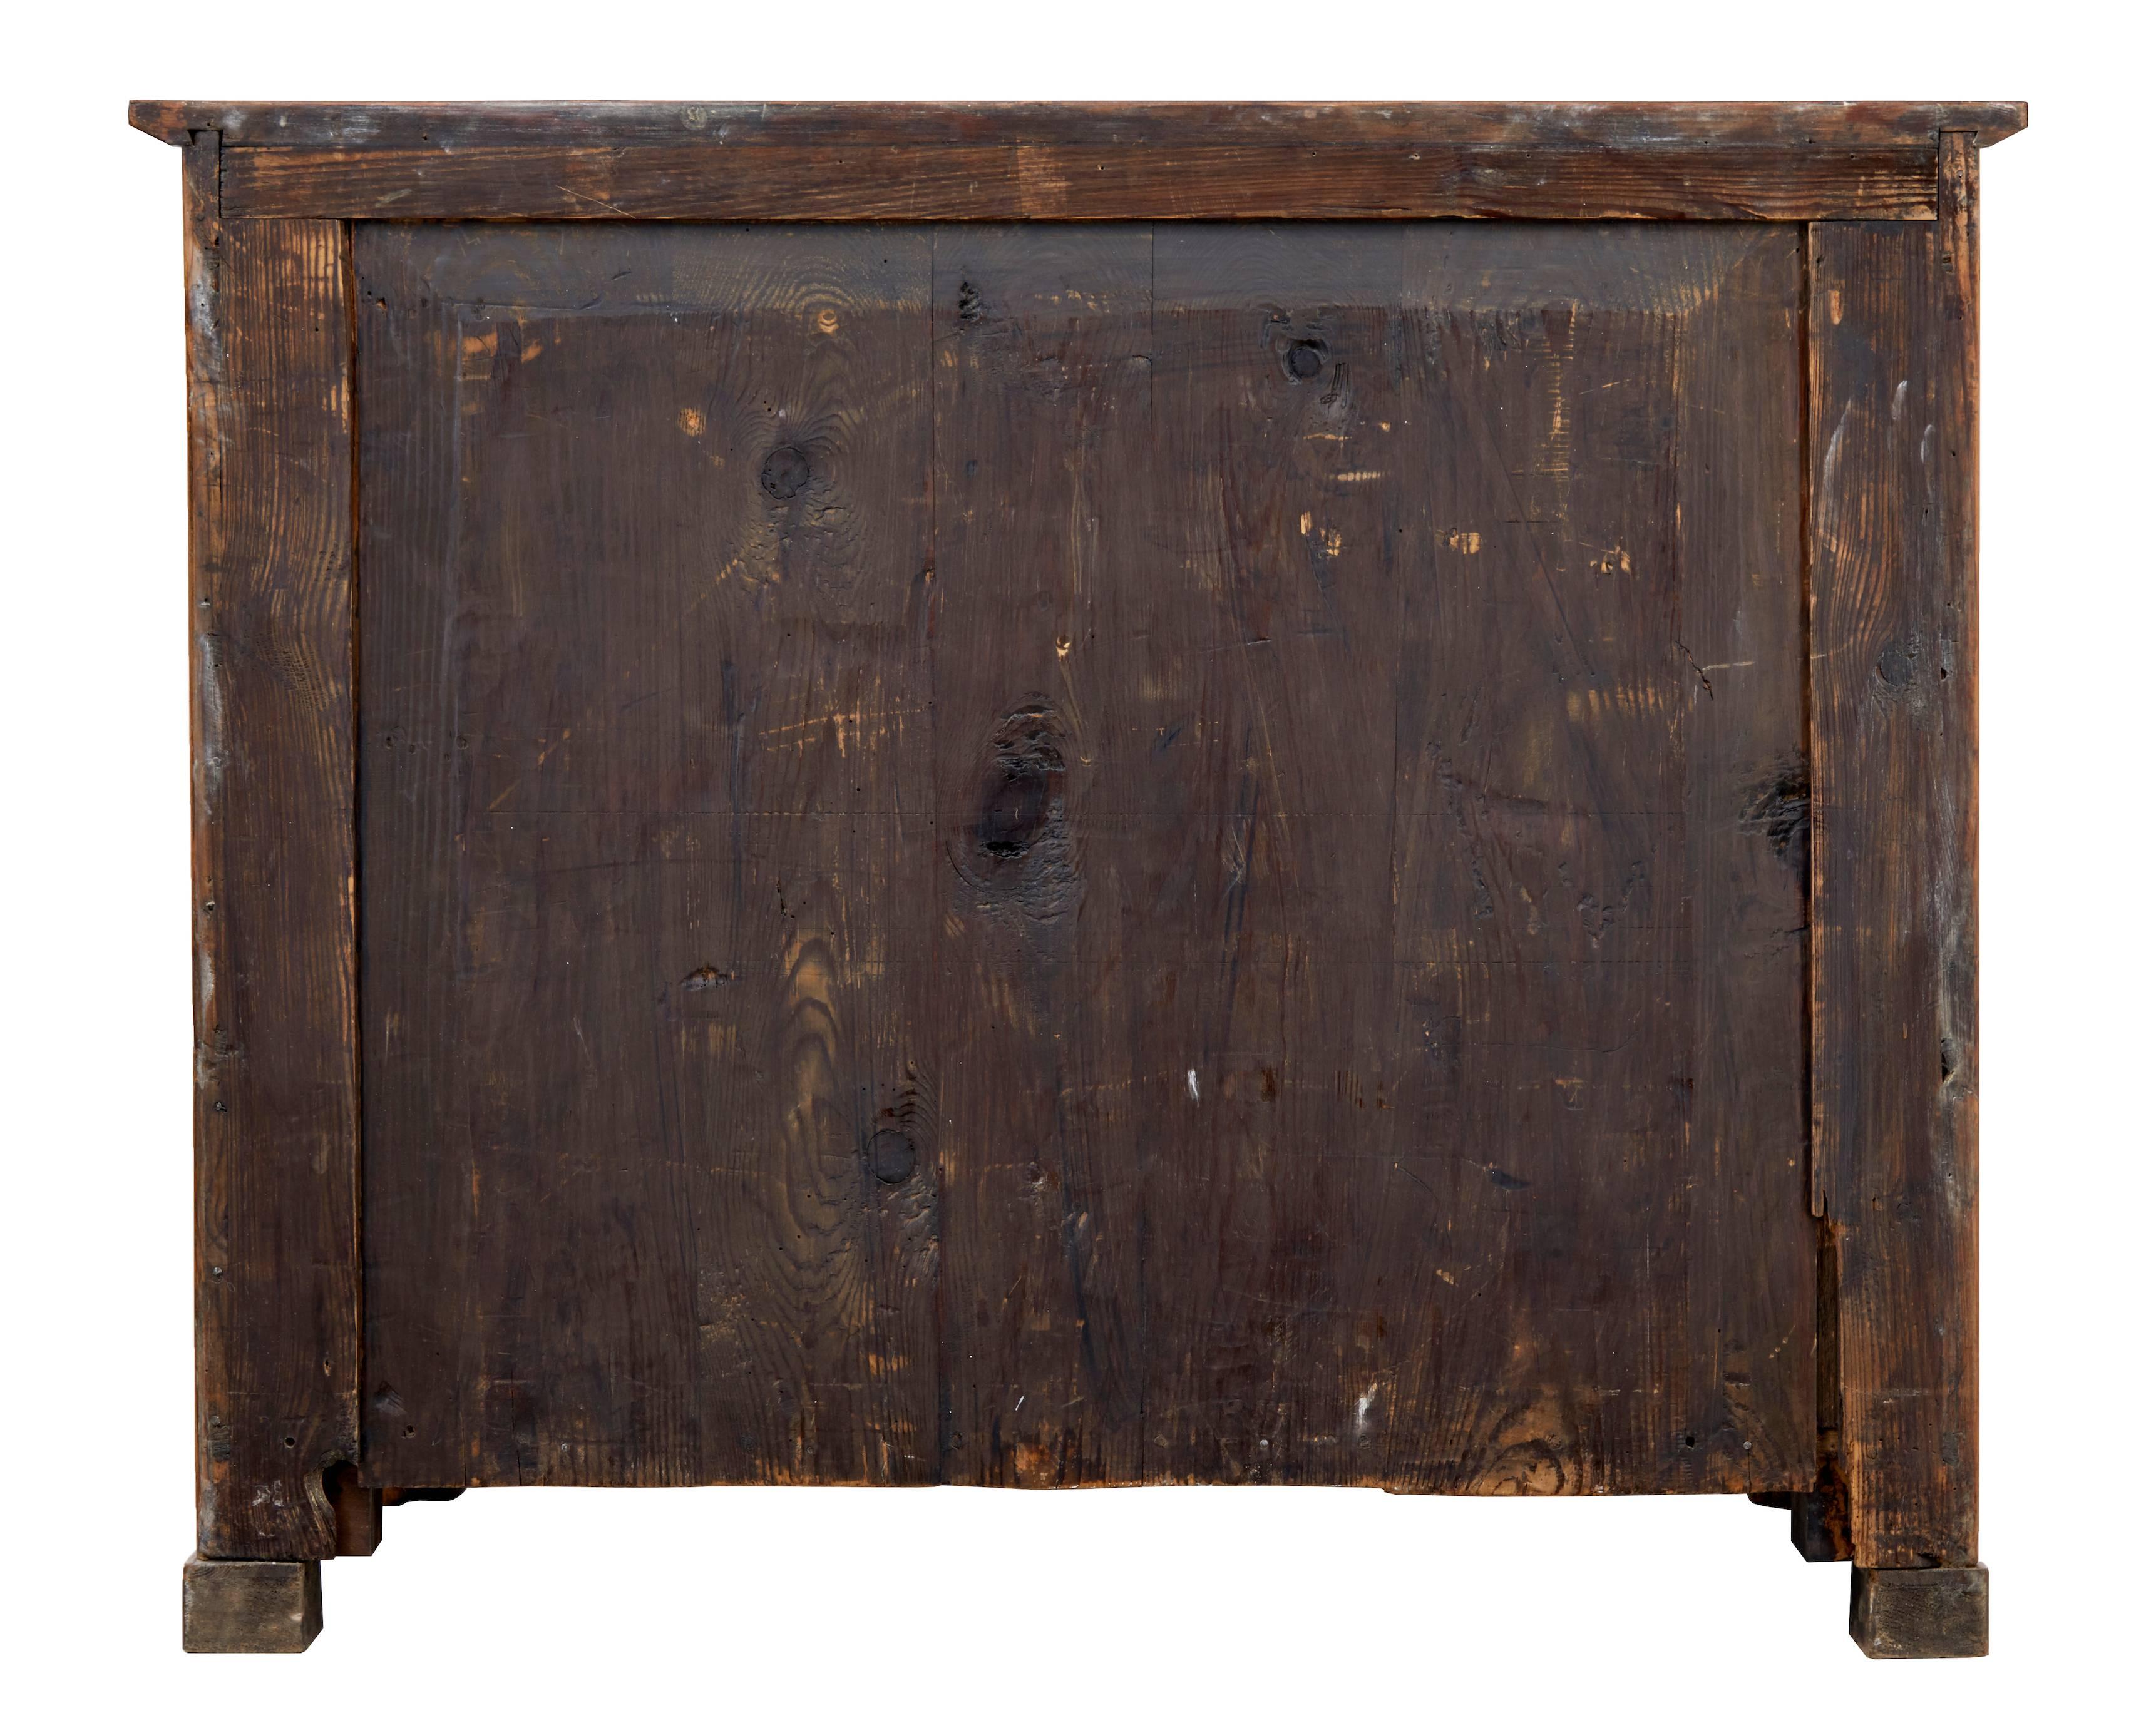 Woodwork Early 19th Century, Danish Walnut Commode Chest of Drawers